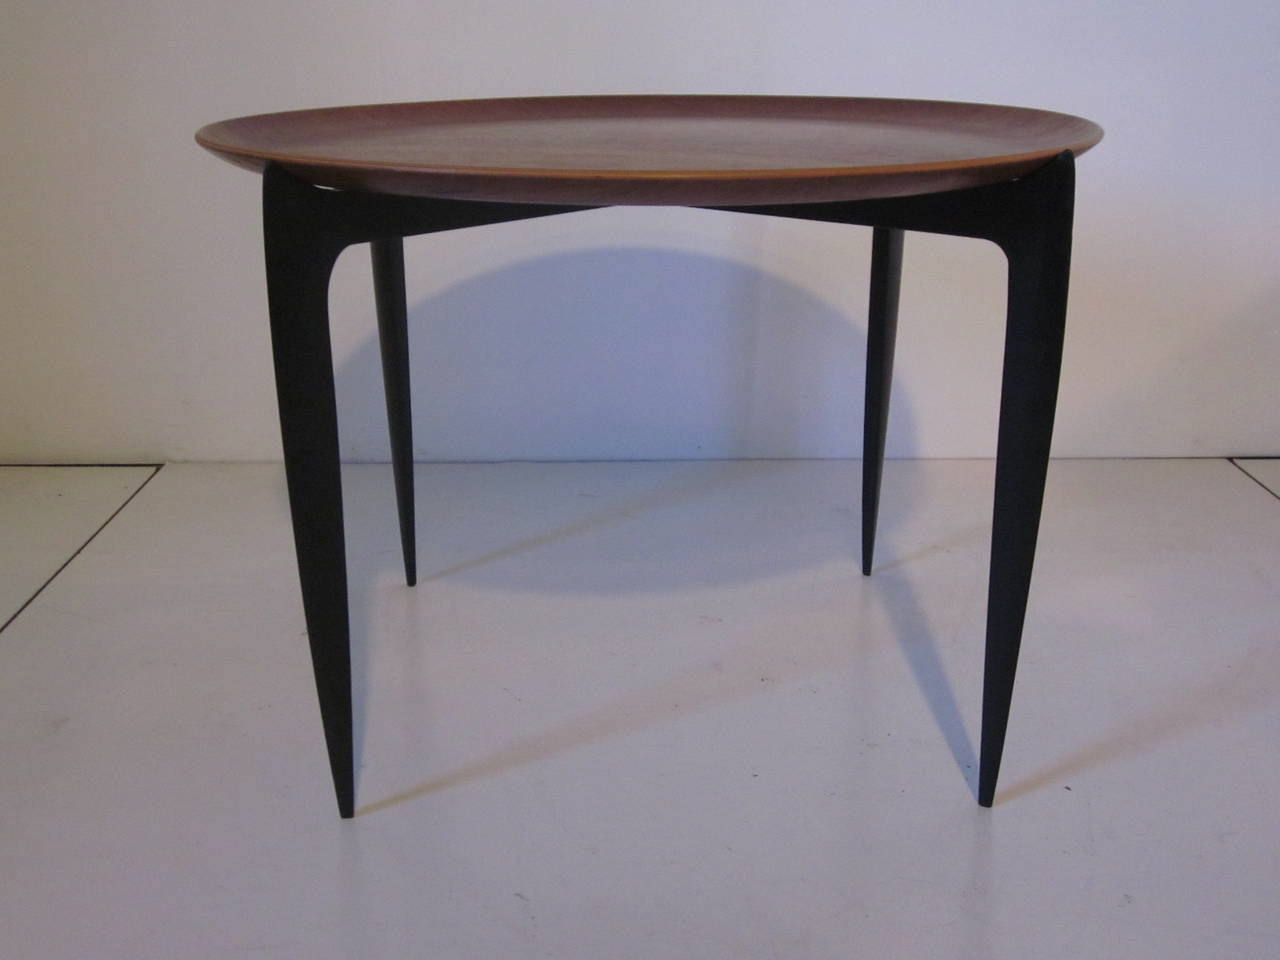 A round dished teakwood tray tabletop with ebony black folding legs great for that small space, marked with stamp to both the top and legs, FH ( Fritz Hansen ) Made in Denmark.